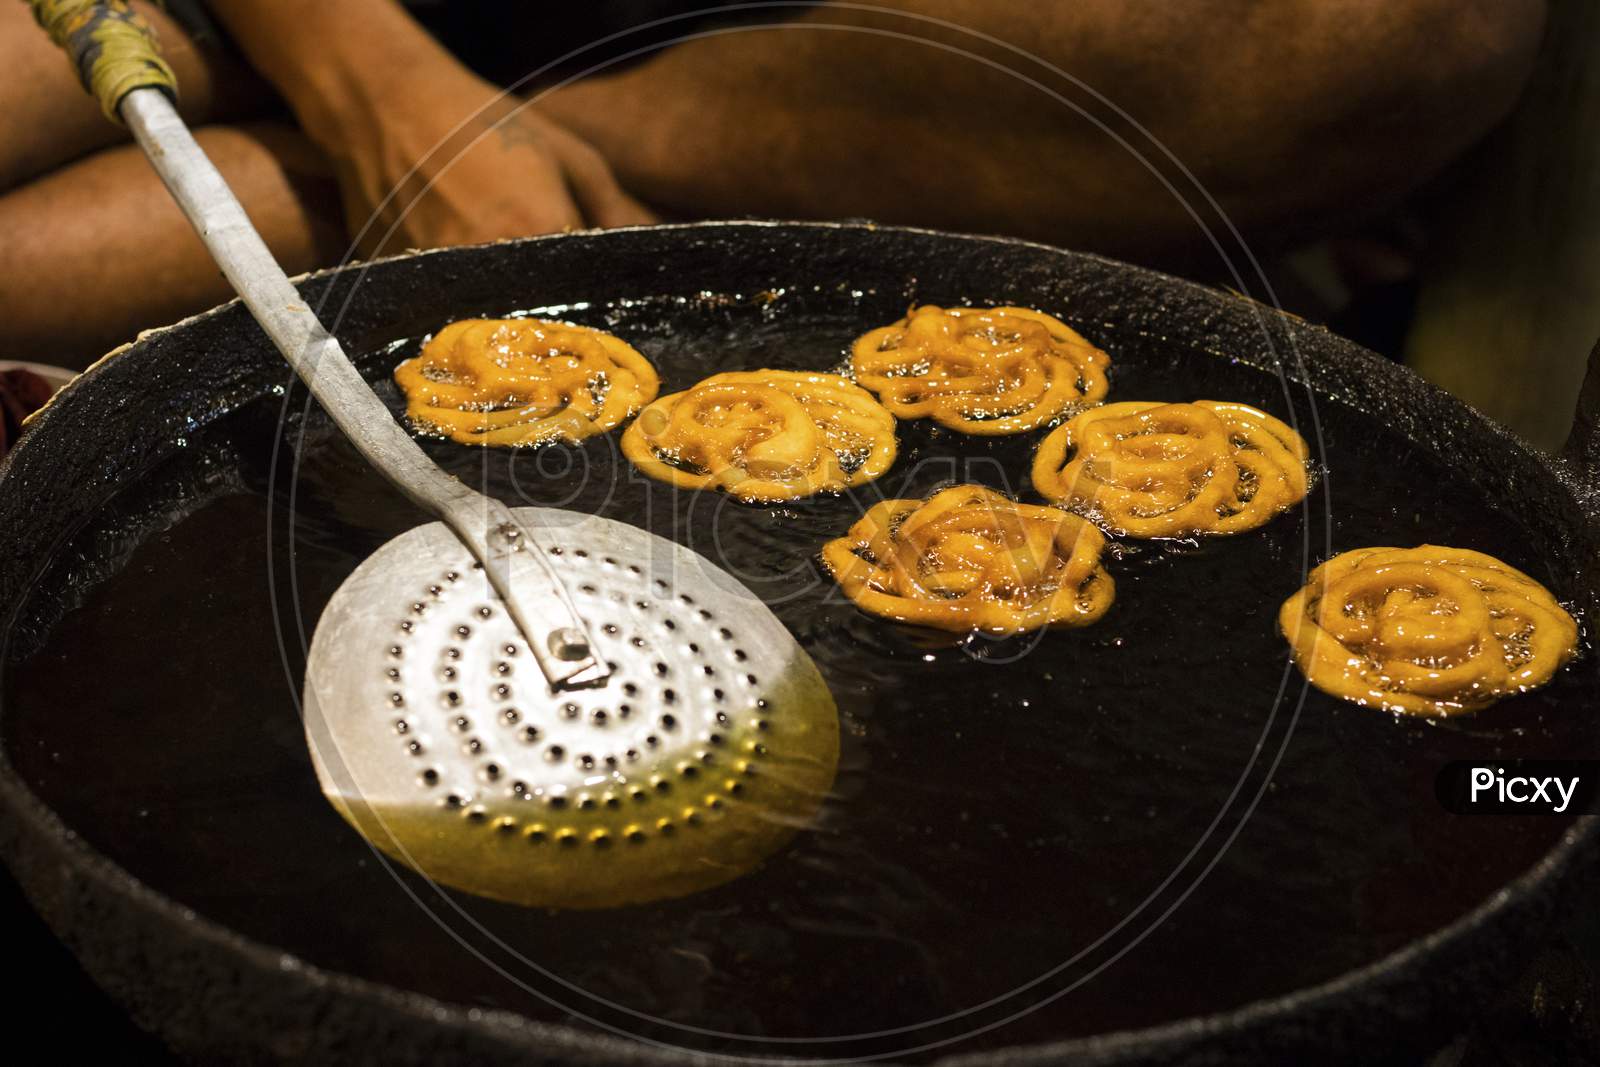 Jalebi is an Indian sweet and delicious food made of Maida flour and sugar syrup